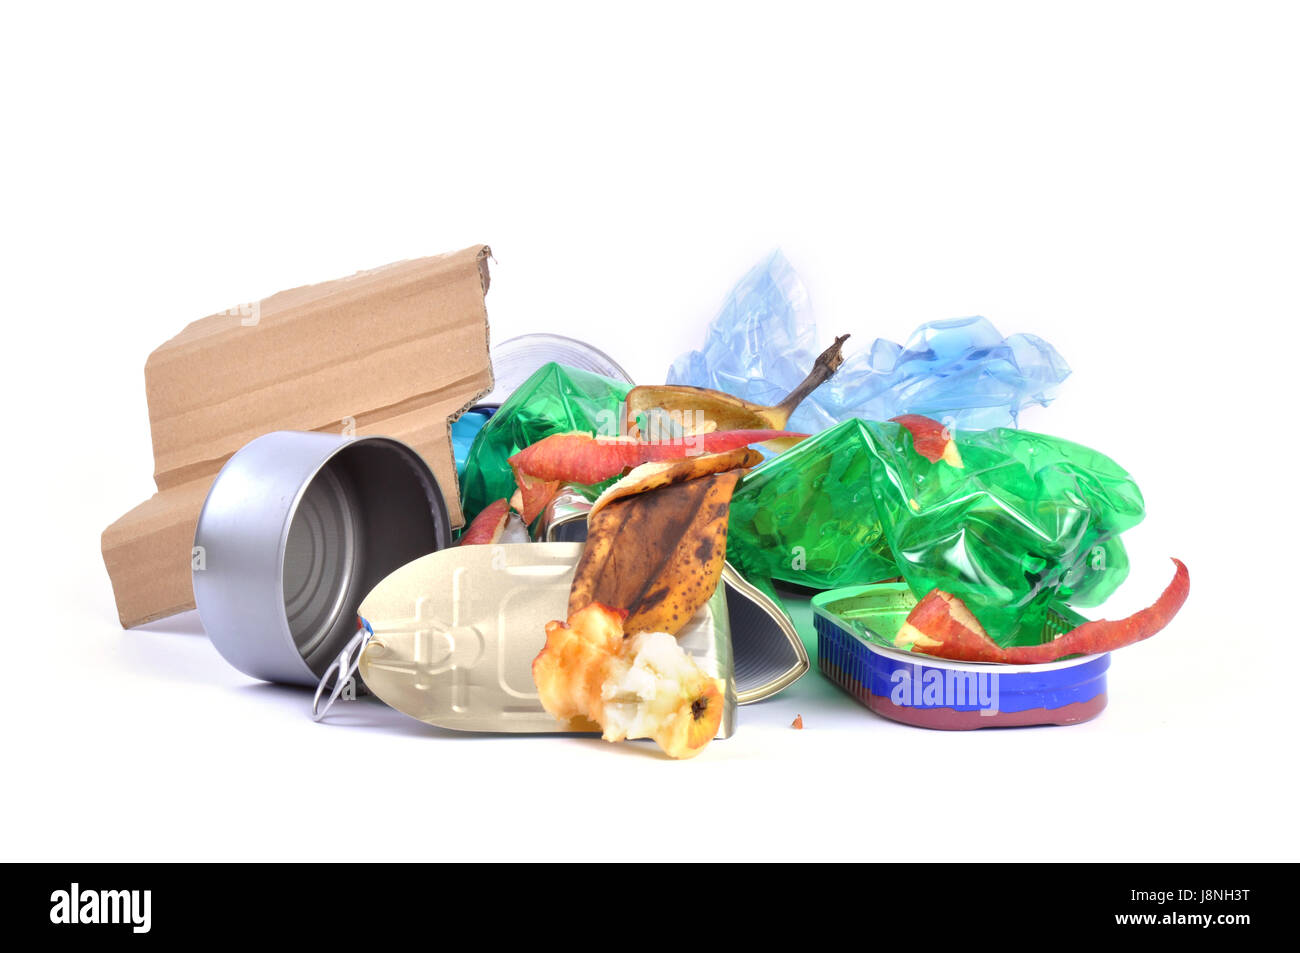 environment, enviroment, isolated, trash, pollution, recycling, heap, pile, Stock Photo